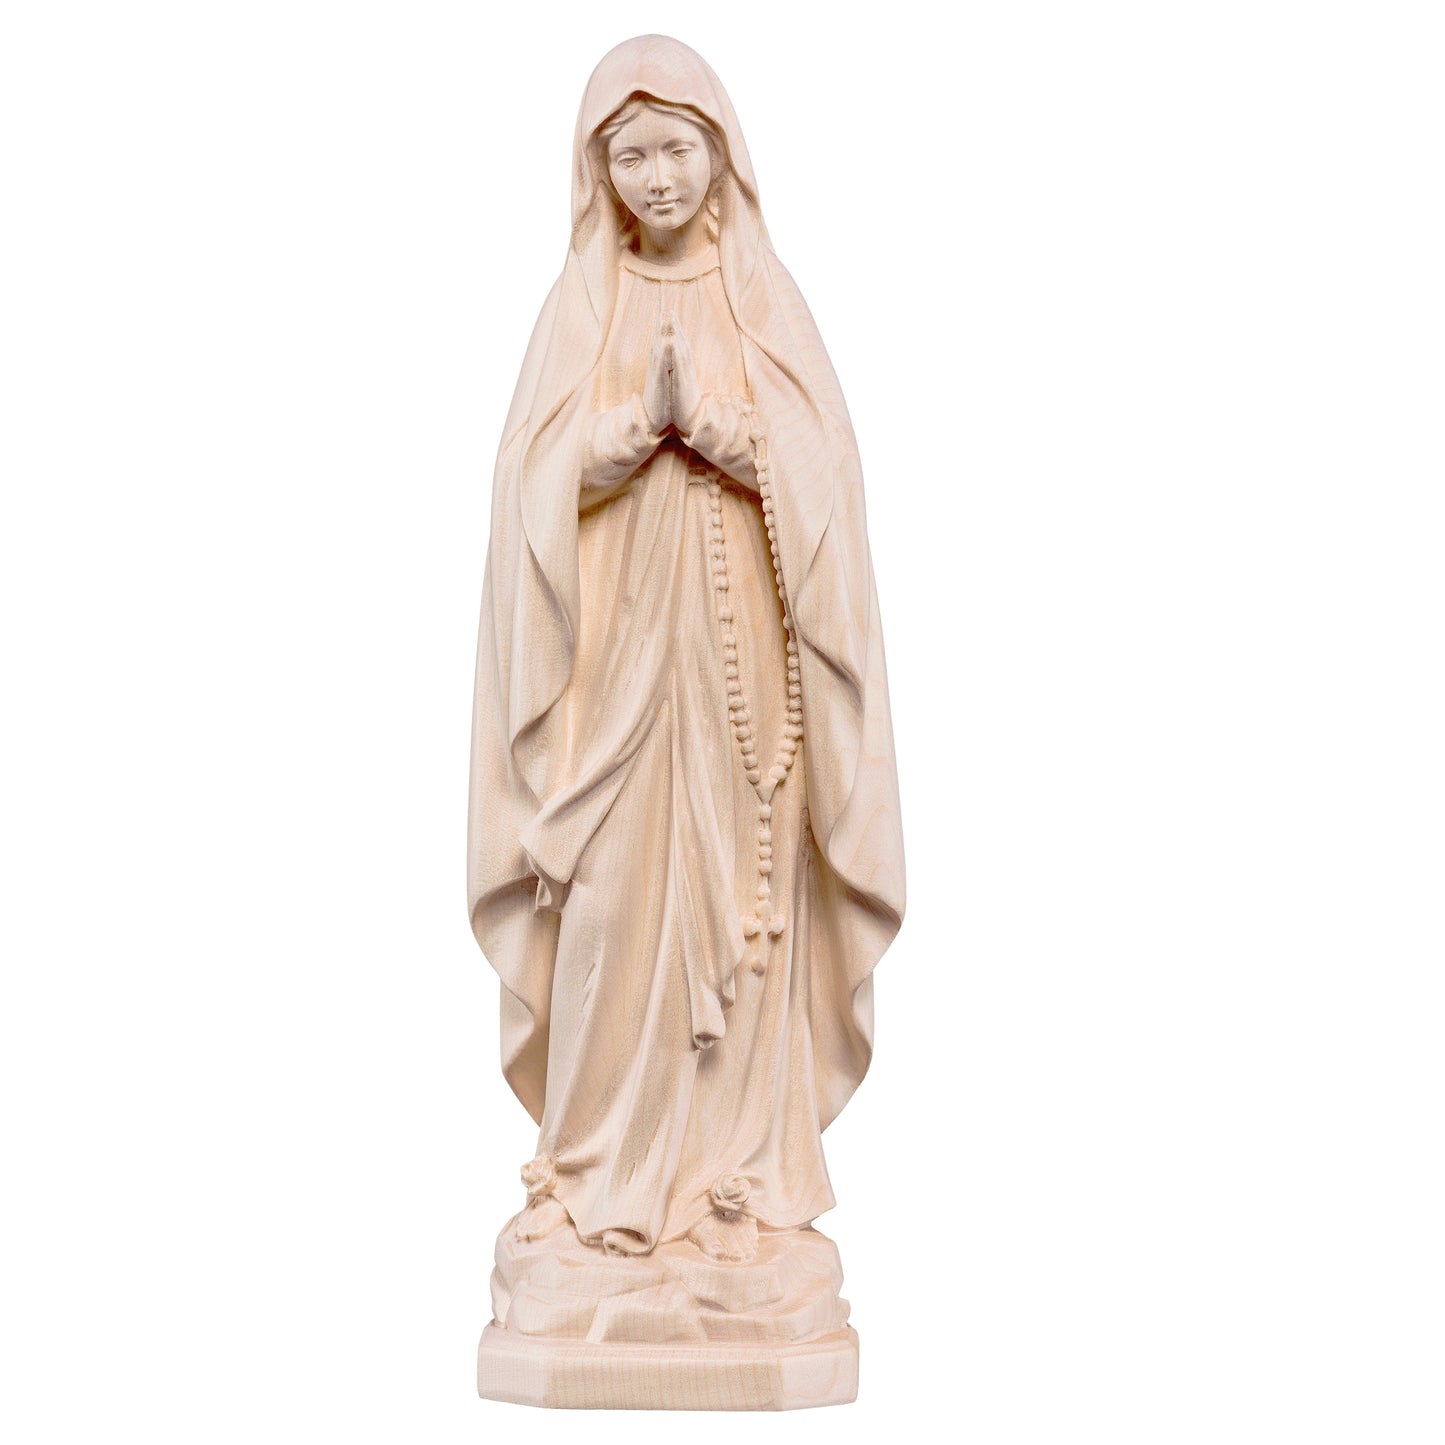 MONDO CATTOLICO Natural / 15 cm (5.9 in) Wooden statue of Our Lady of Lourdes